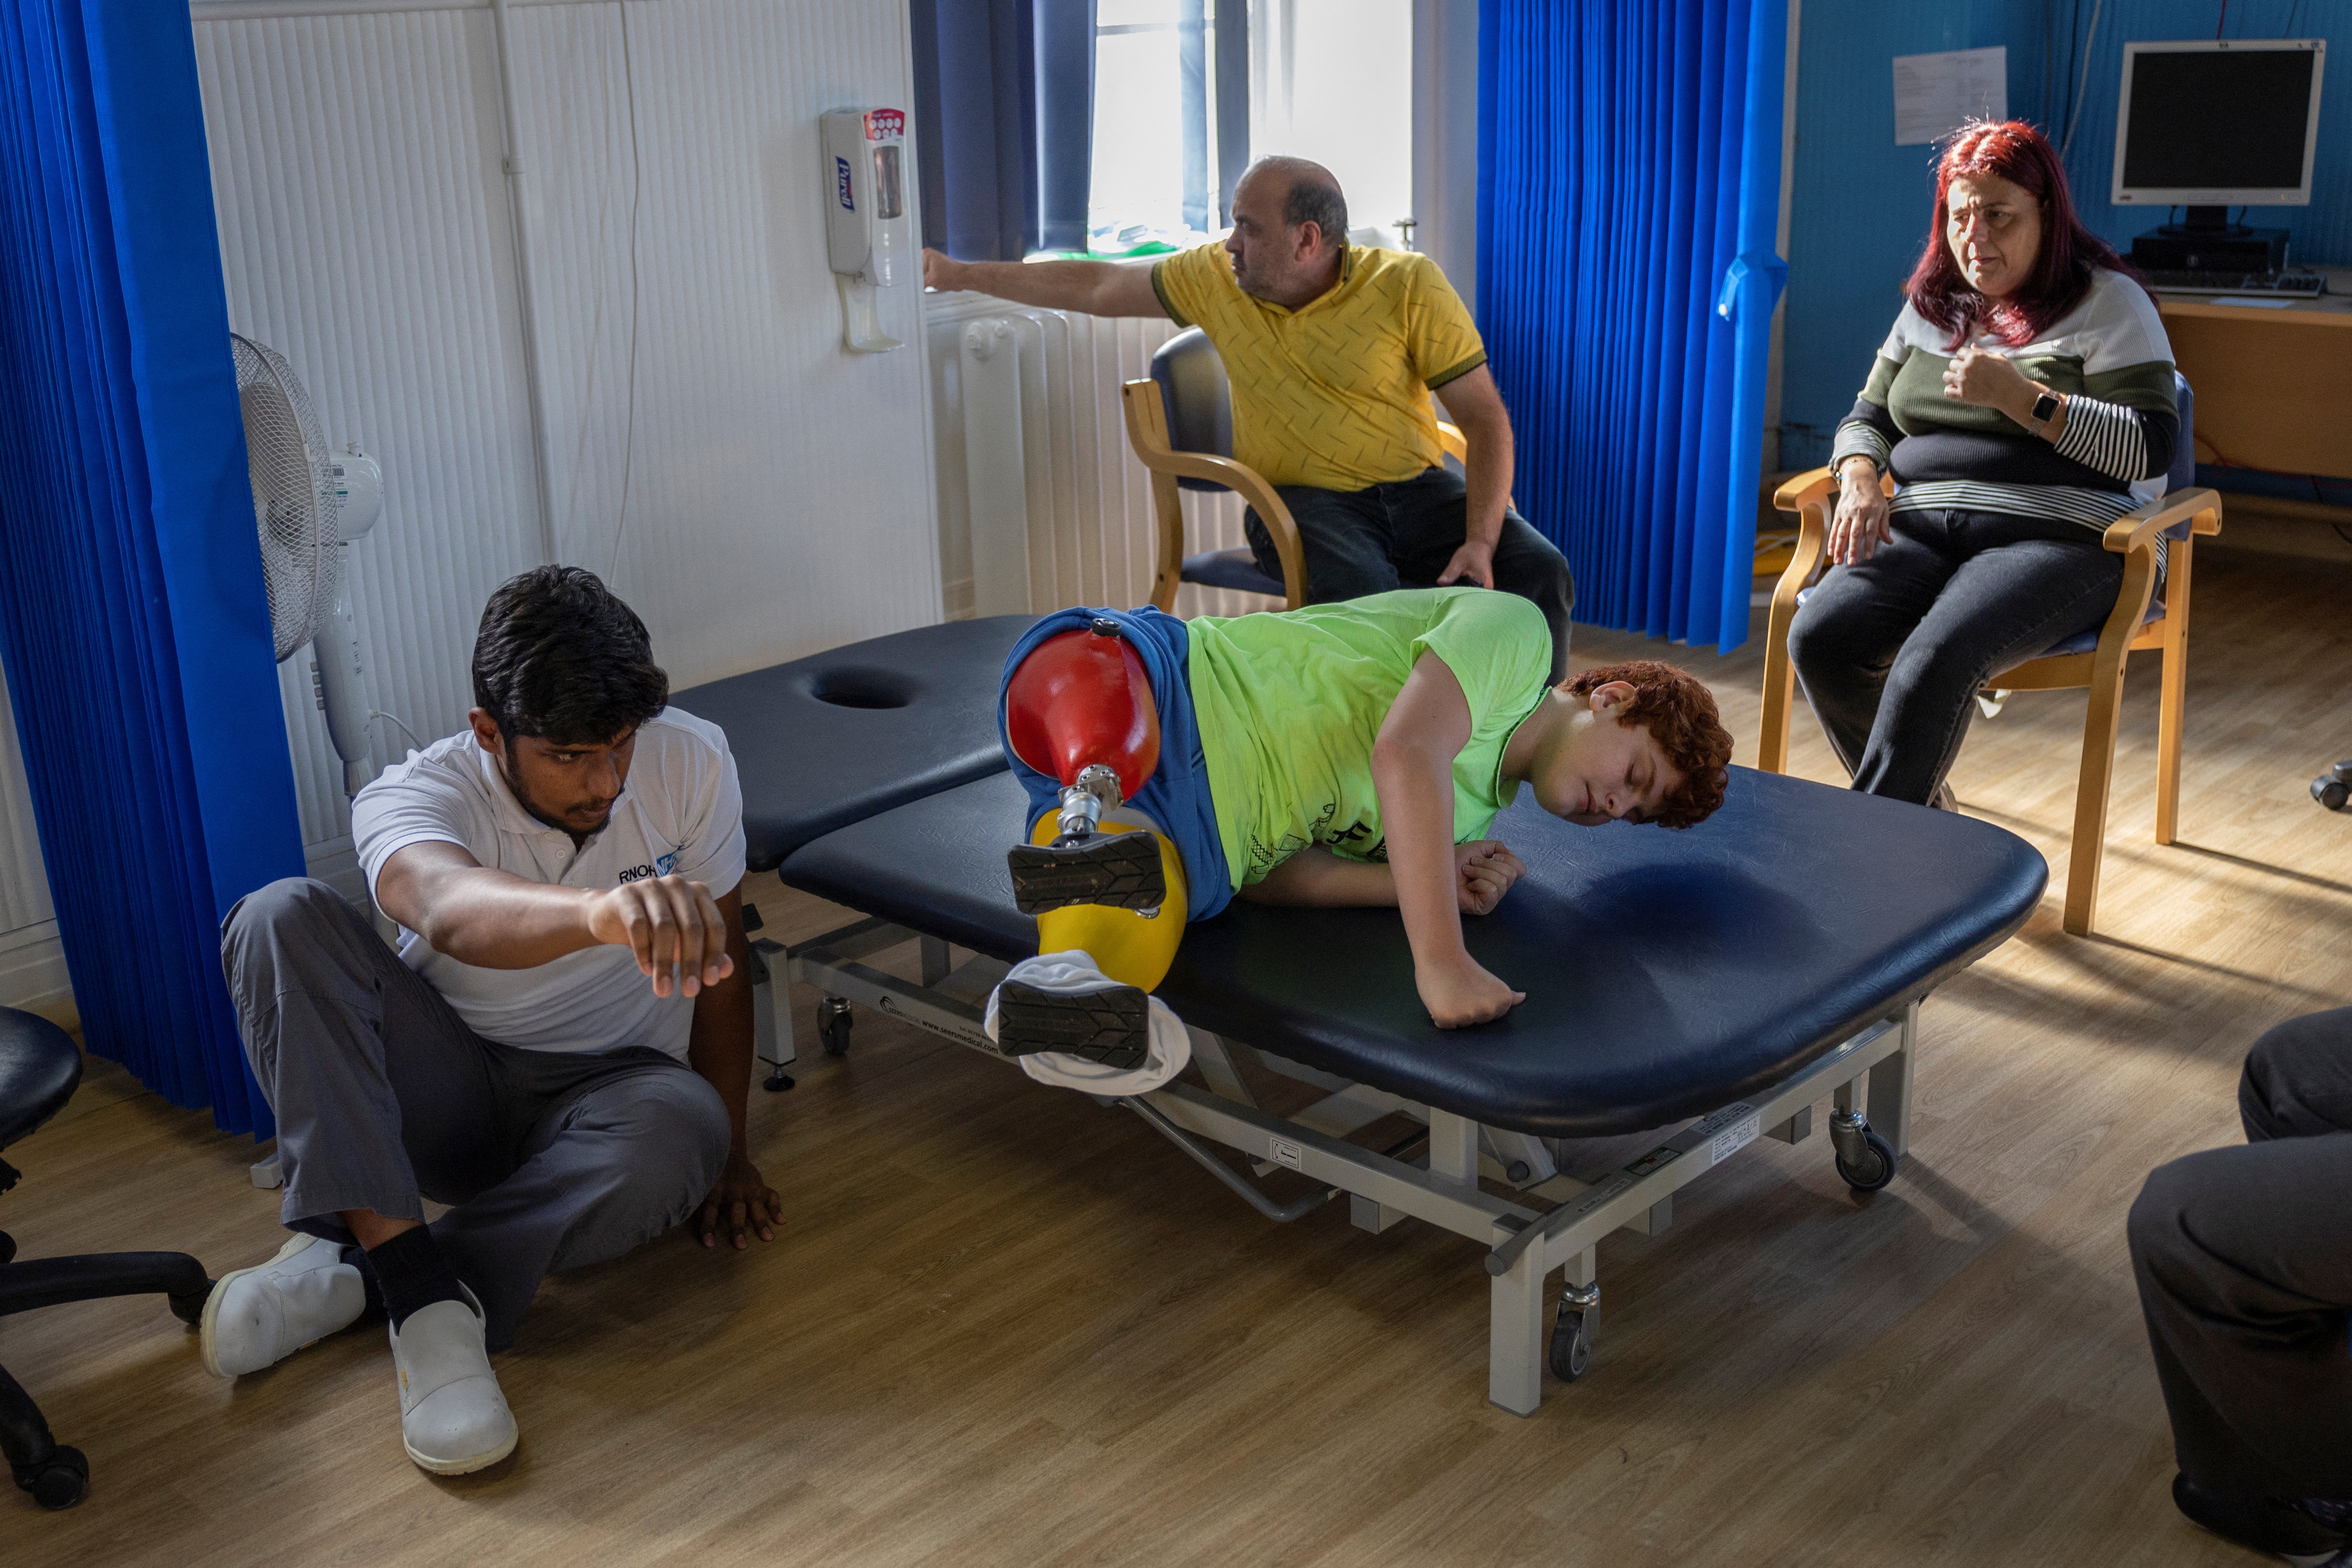 Prosthetist Paul Gandrapu attends to Mehmet Koc, 13, on a treatment bed at the Royal National Orthopaedic Hospital in London